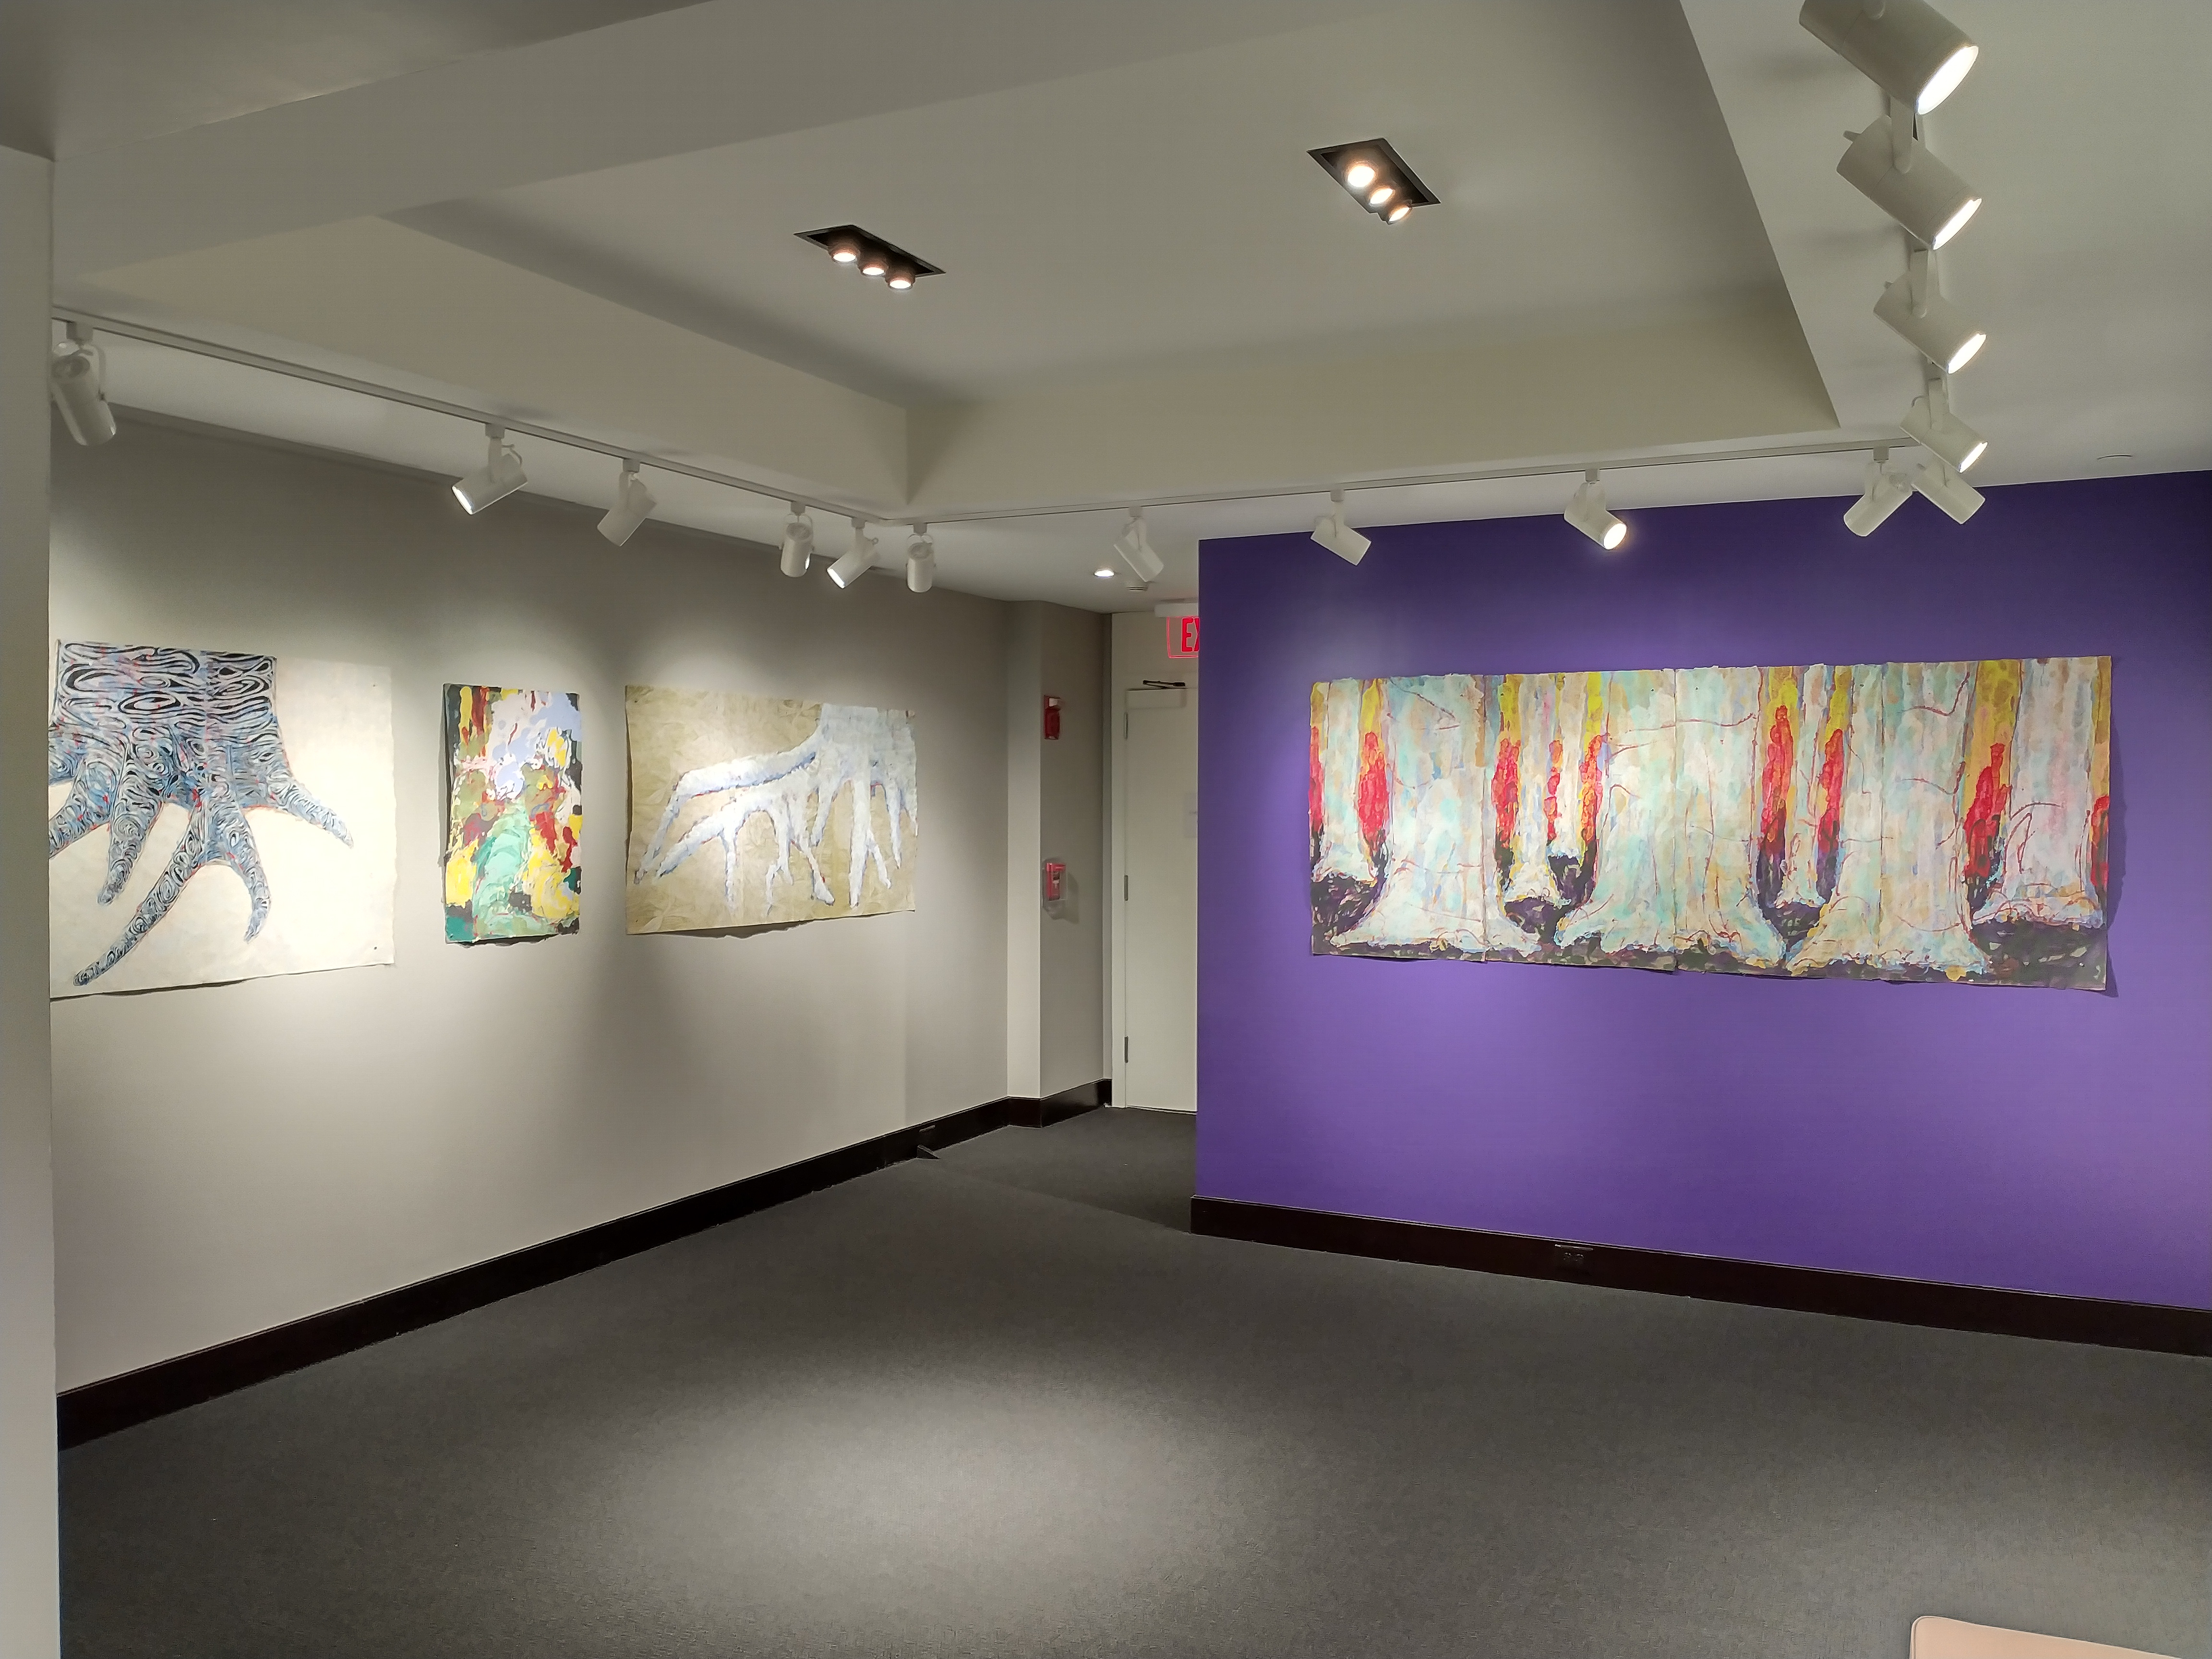 The east wall connects with the south wall which is the accent wall that can be seen even from the entrance to the larger gallery. The entire south wall is covered by a triptych of tree trunks titled Dissolved Time by Andrea Peterson. The piece features large scale white tree trunks overtop of a sunset of yellows and reds that ends at a horizon line of purple earth.